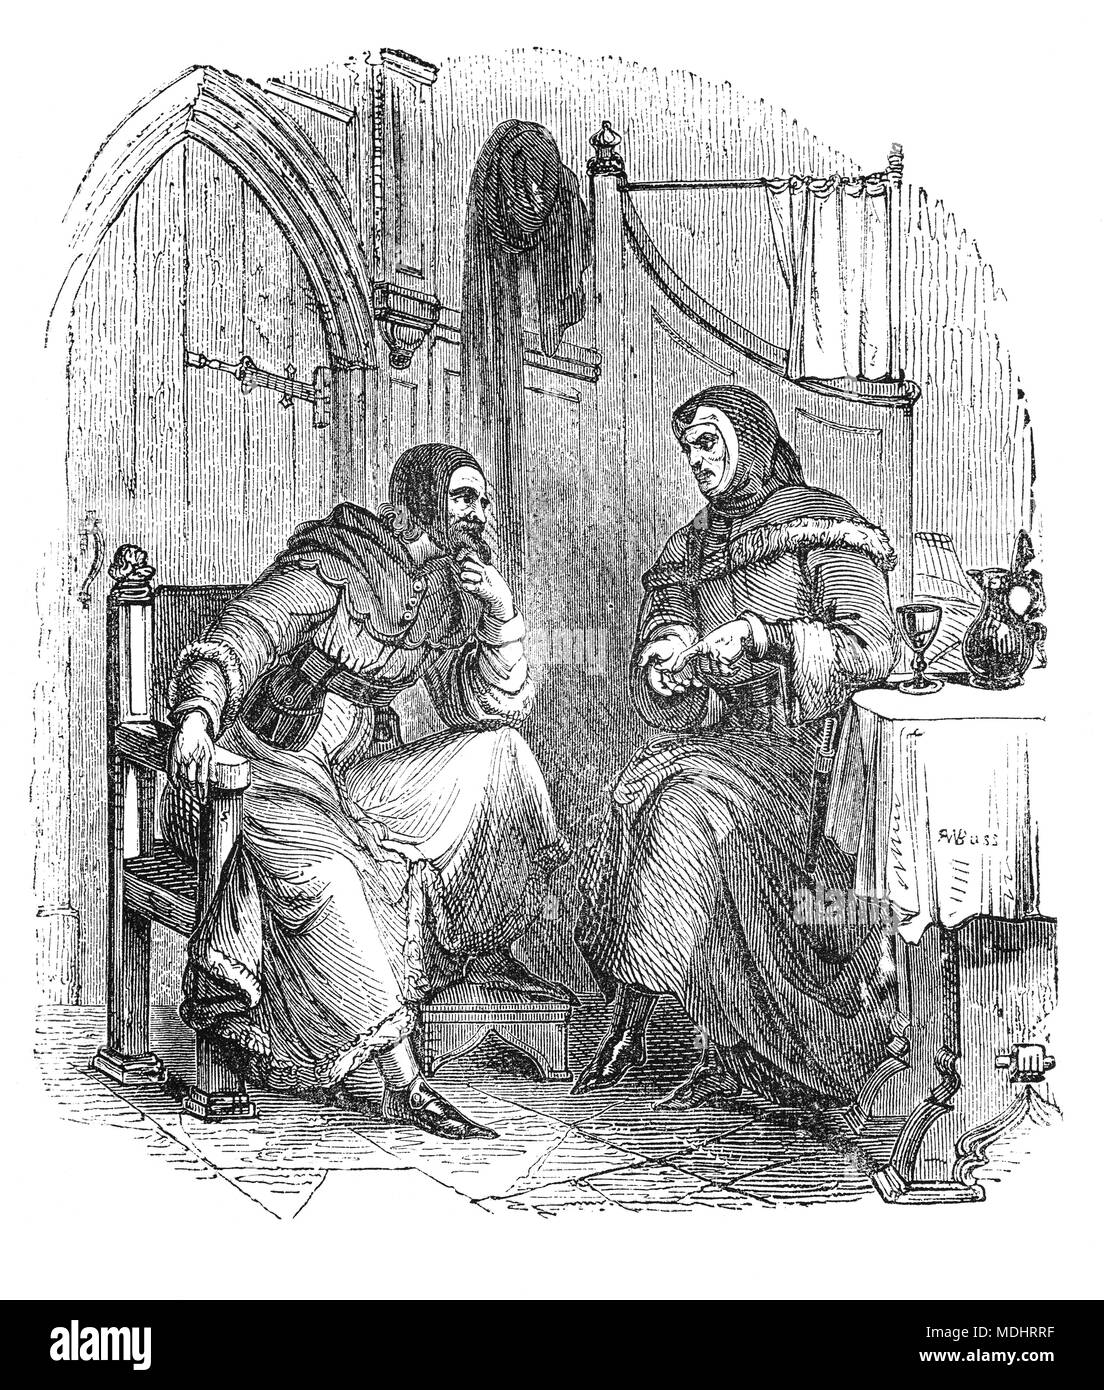 Two of the characters from The Canterbury Tales, a collection of 24 stories written  by Geoffrey Chaucer between 1387 and 1400 when he became Controller of Customs and Justice of Peace.  The tales (mostly written in verse, although some are in prose) are presented as part of a story-telling contest by a group of pilgrims as they travel together on a journey from London to Canterbury to visit the shrine of Saint Thomas Becket at Canterbury Cathedral. The illustration shows the Sargeant-at-Law and the Doctor of Medicine. Stock Photo